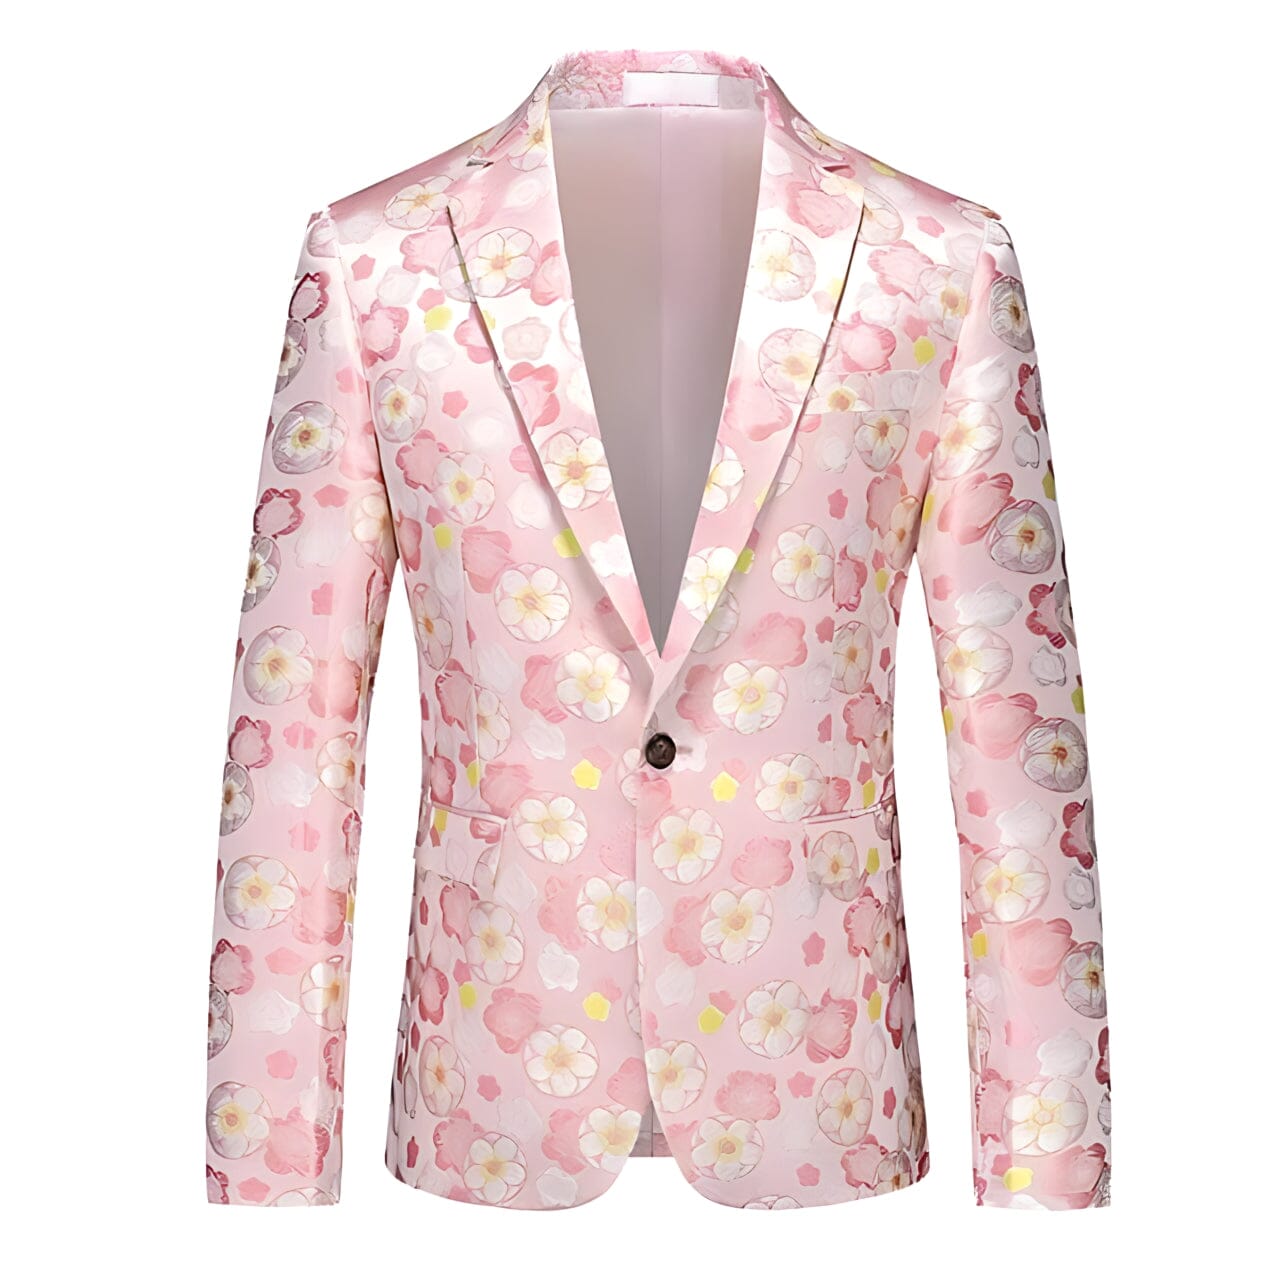 The Spring Blossom Slim Fit Blazer Suit Jacket - Multiple Colors WD Styles Pink XS 